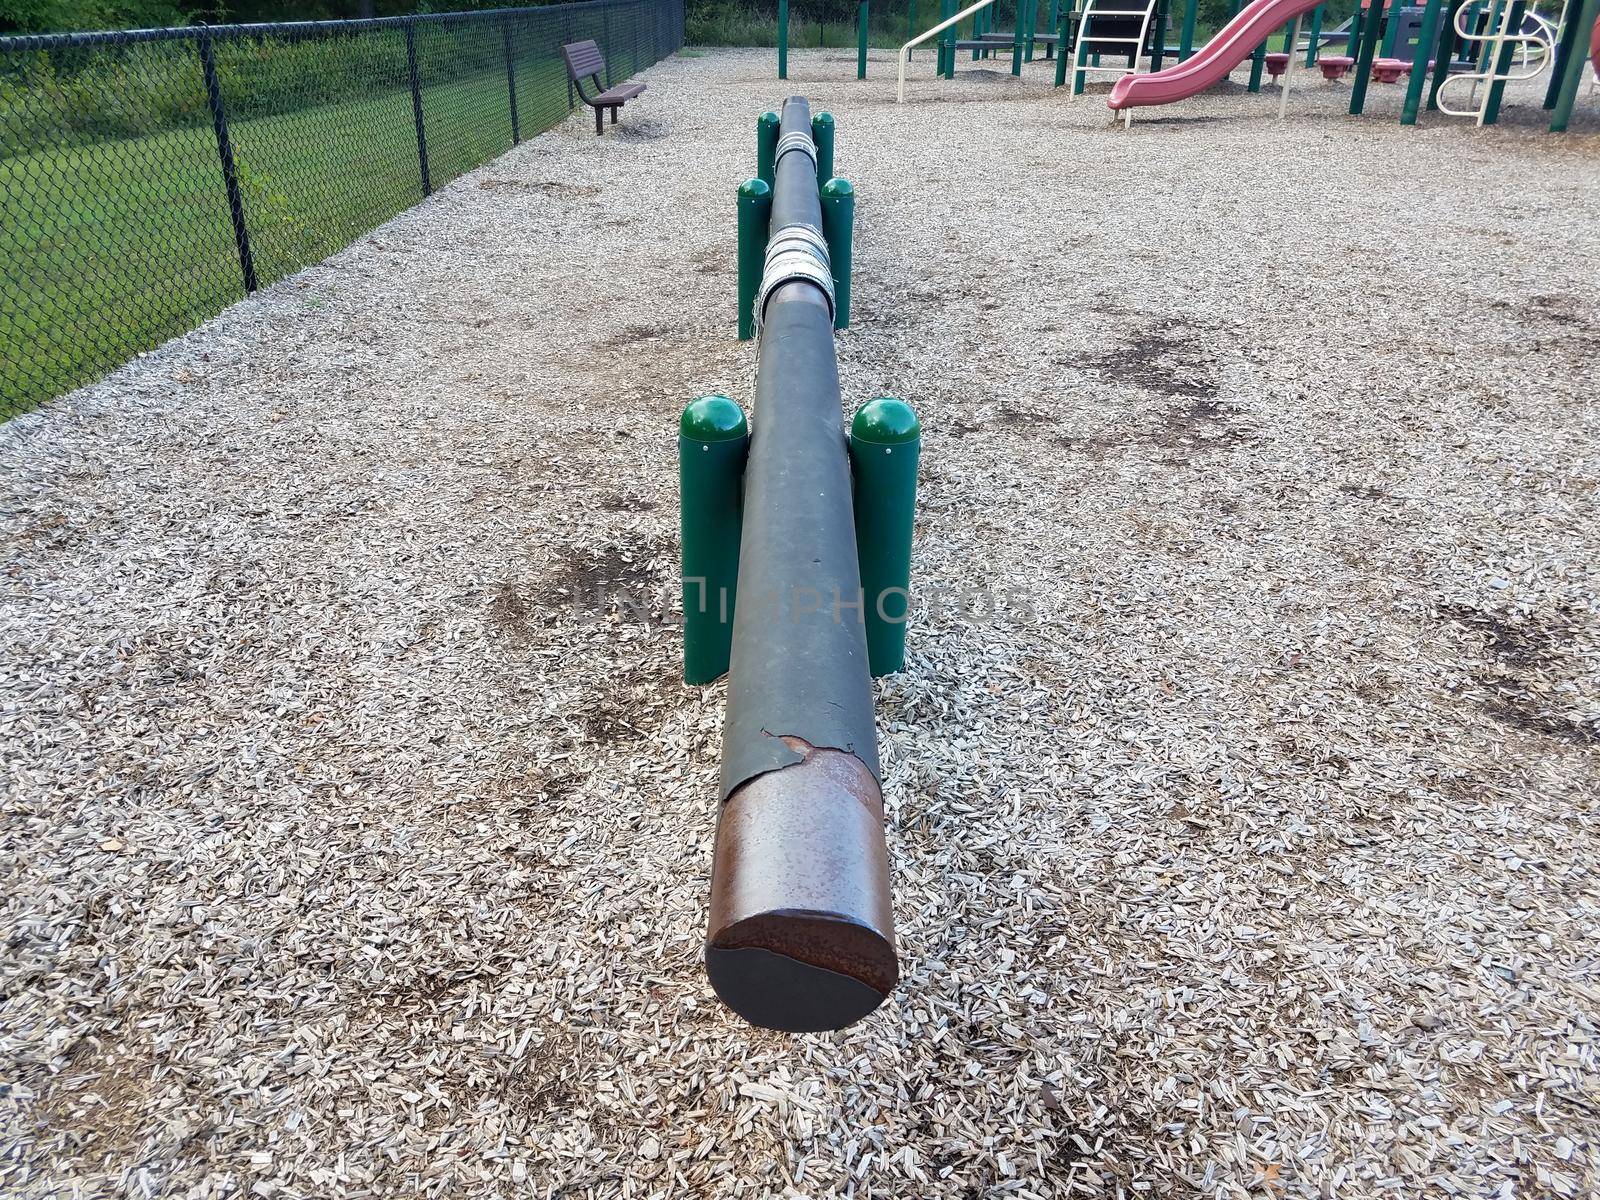 long balance beam at playground with brown wood chips by stockphotofan1